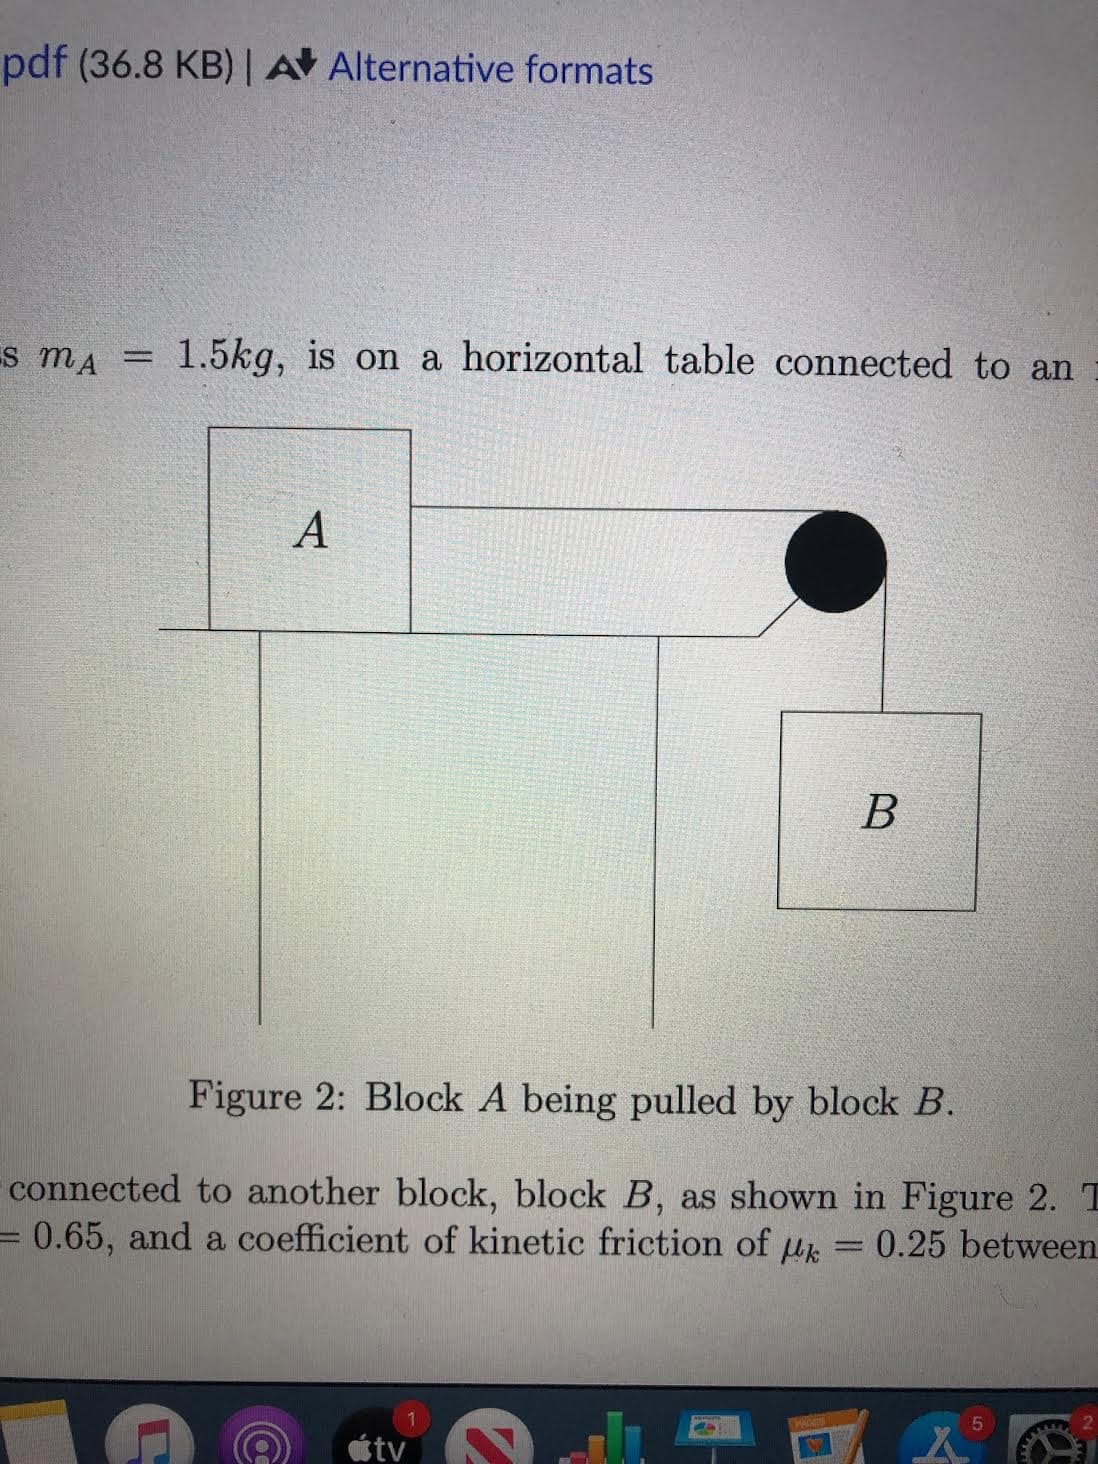 pdf (36.8 KB) | A Alternative formats
Es mA
1.5kg, is on a horizontal table connected to an
%3D
А
Figure 2: Block A being pulled by block B.
connected to another block, block B, as shown in Figure 2. T
=0.65, and a coefficient of kinetic friction of u = 0.25 between
tv
